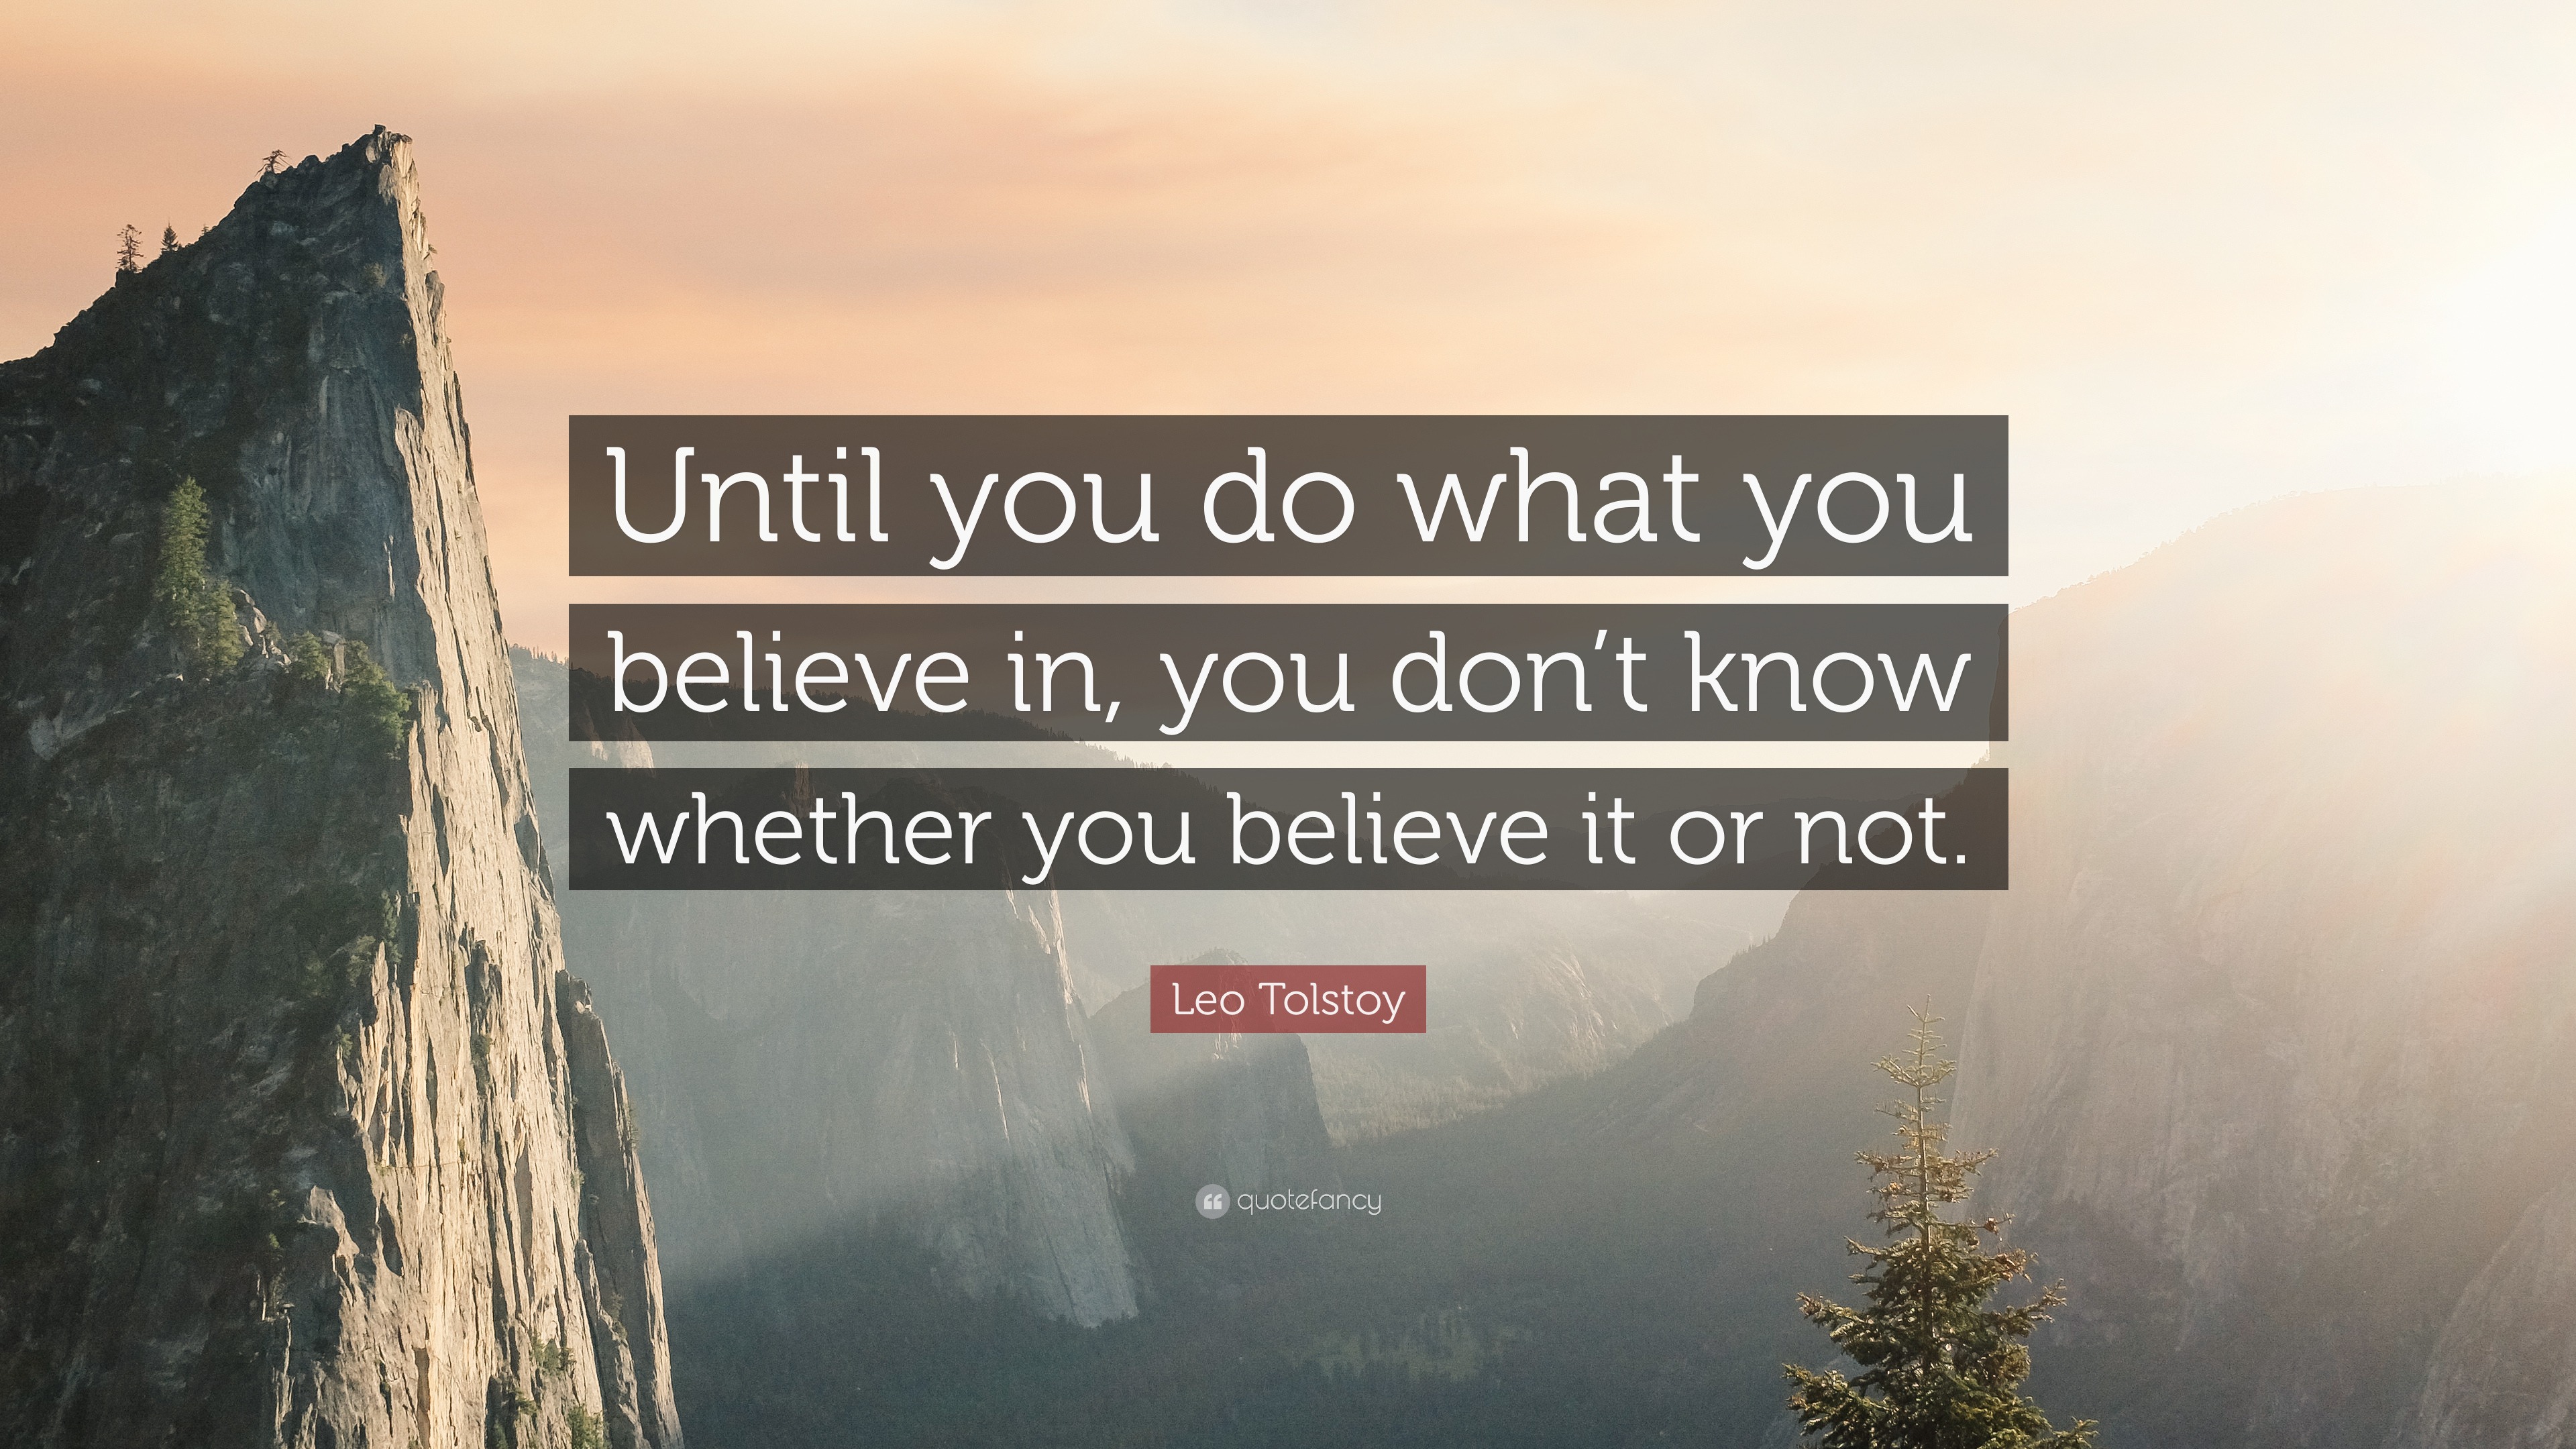 Leo Tolstoy Quote: “Until you do what you believe in, you don’t know ...